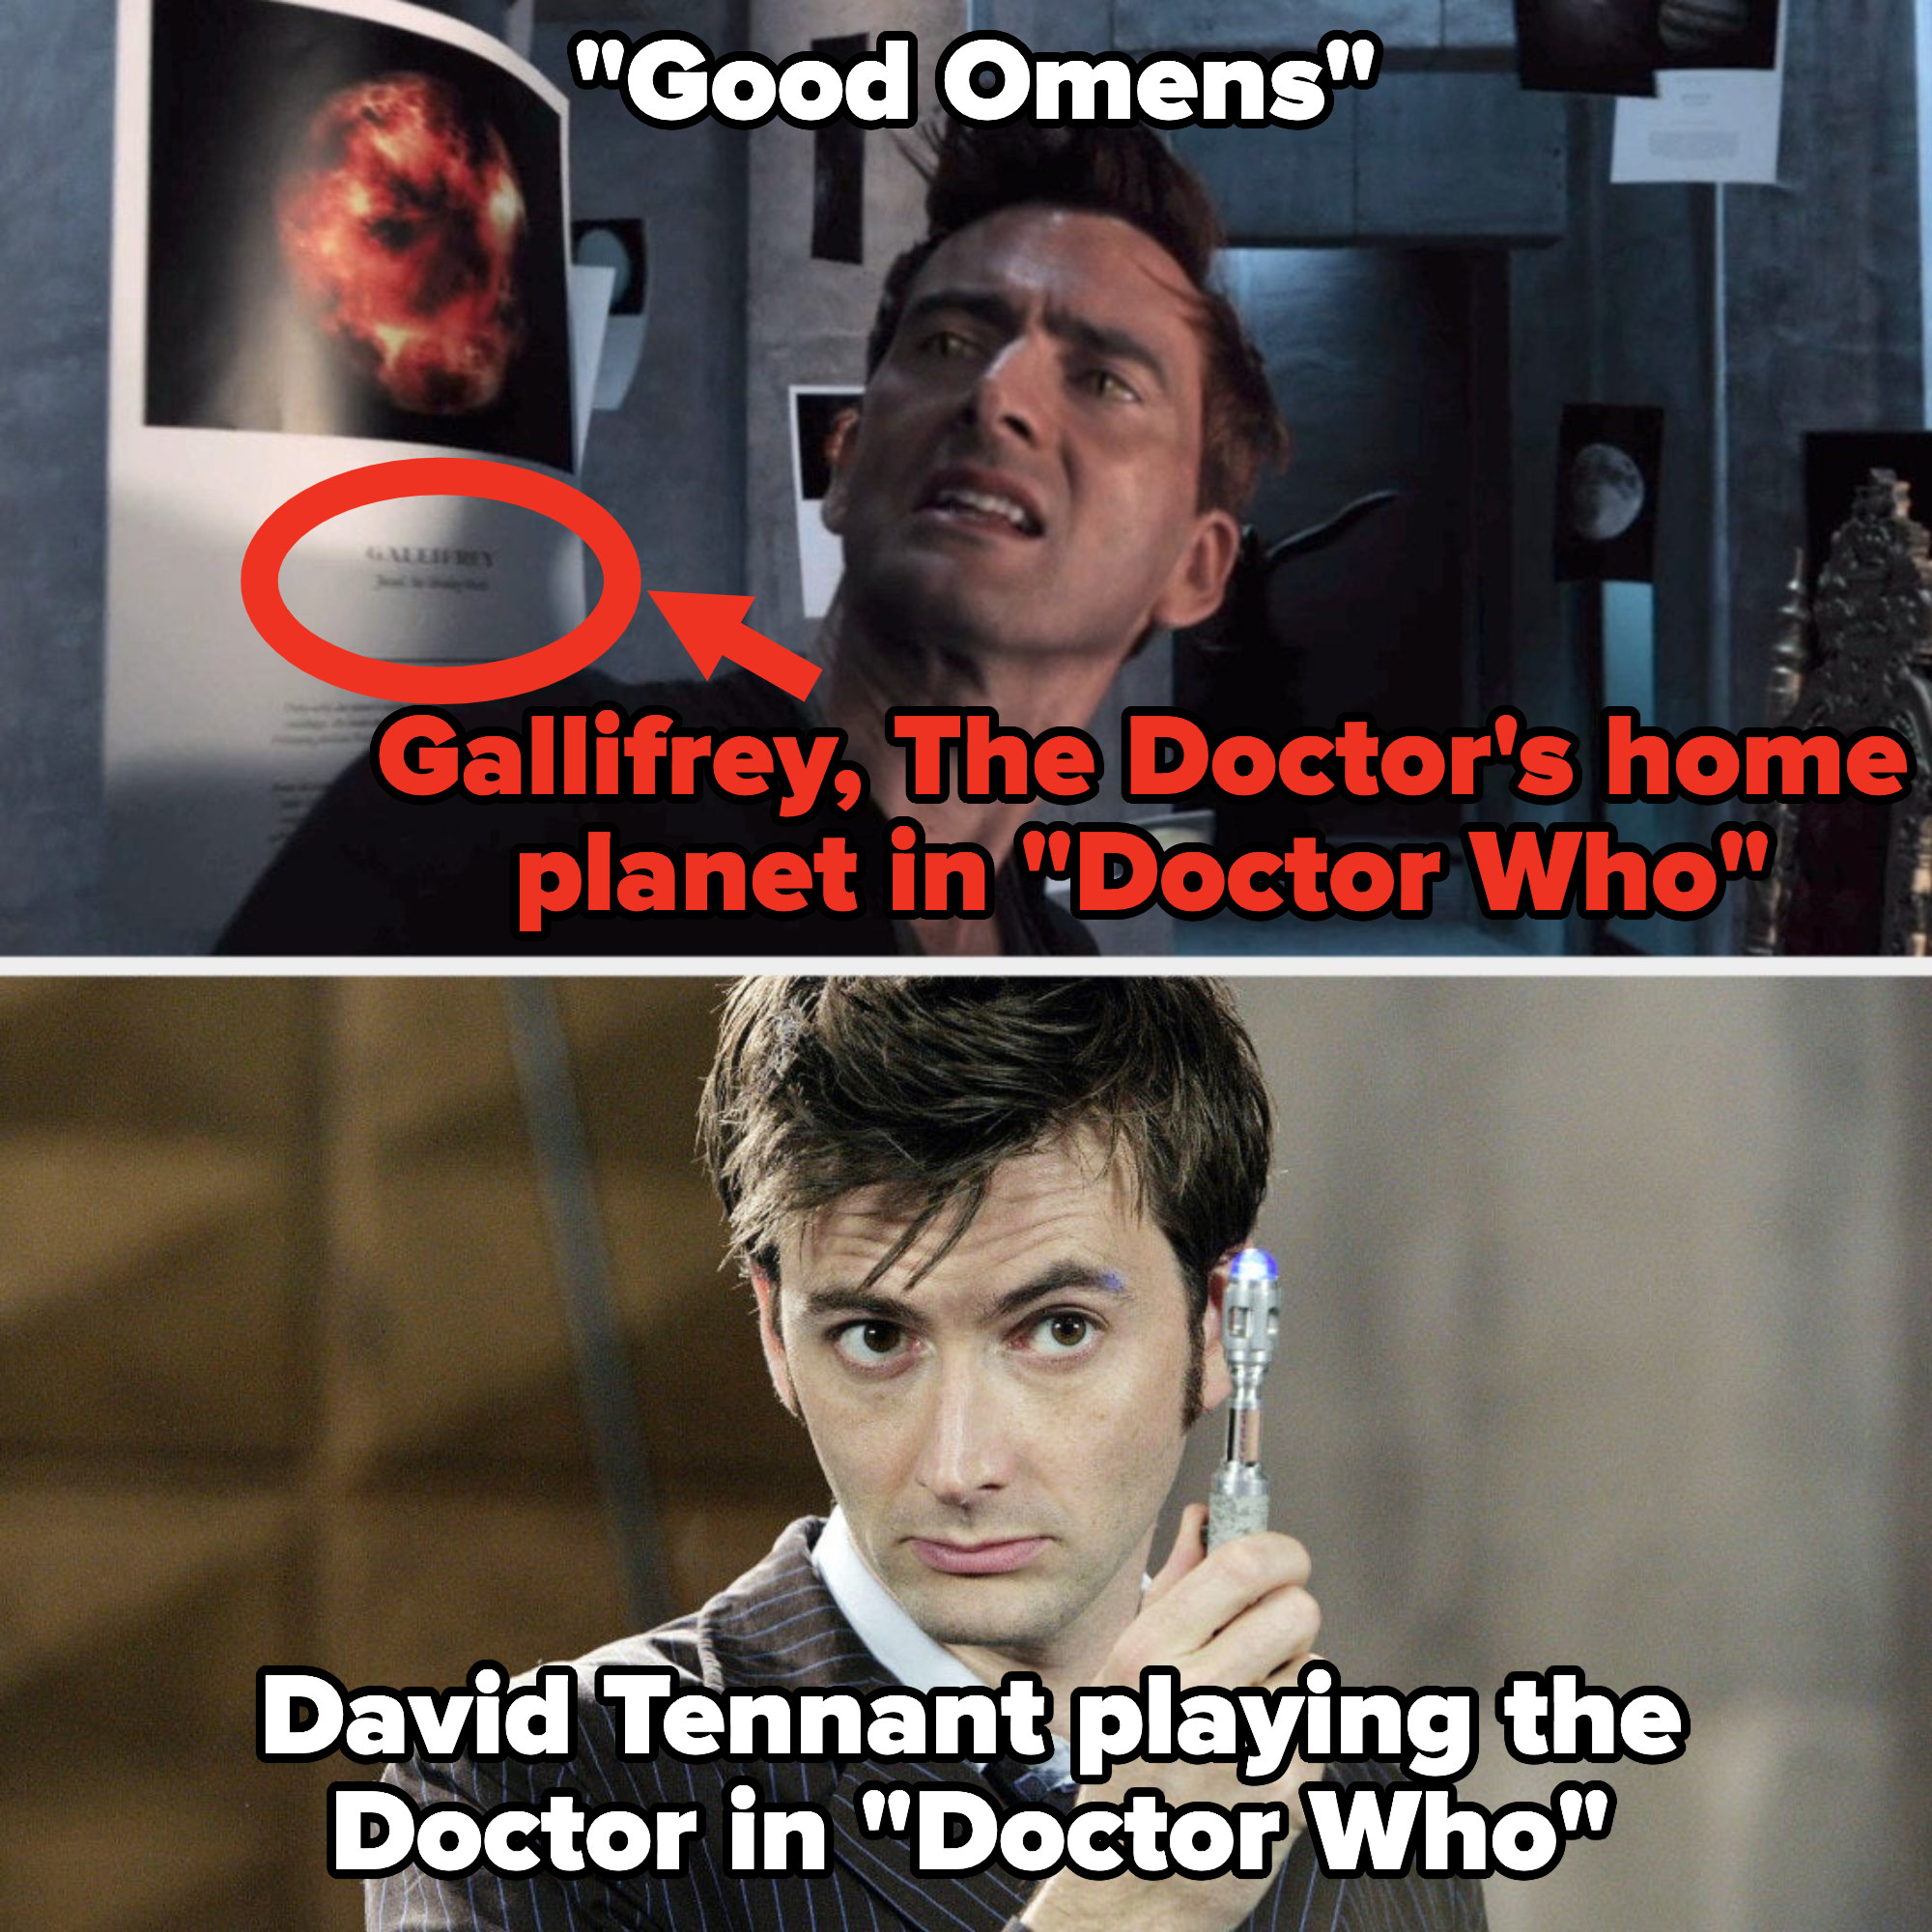 photo of Galligrey in the background of a Good Omens scene with david Tennant, and photo of david tennant in Doctor Whoe